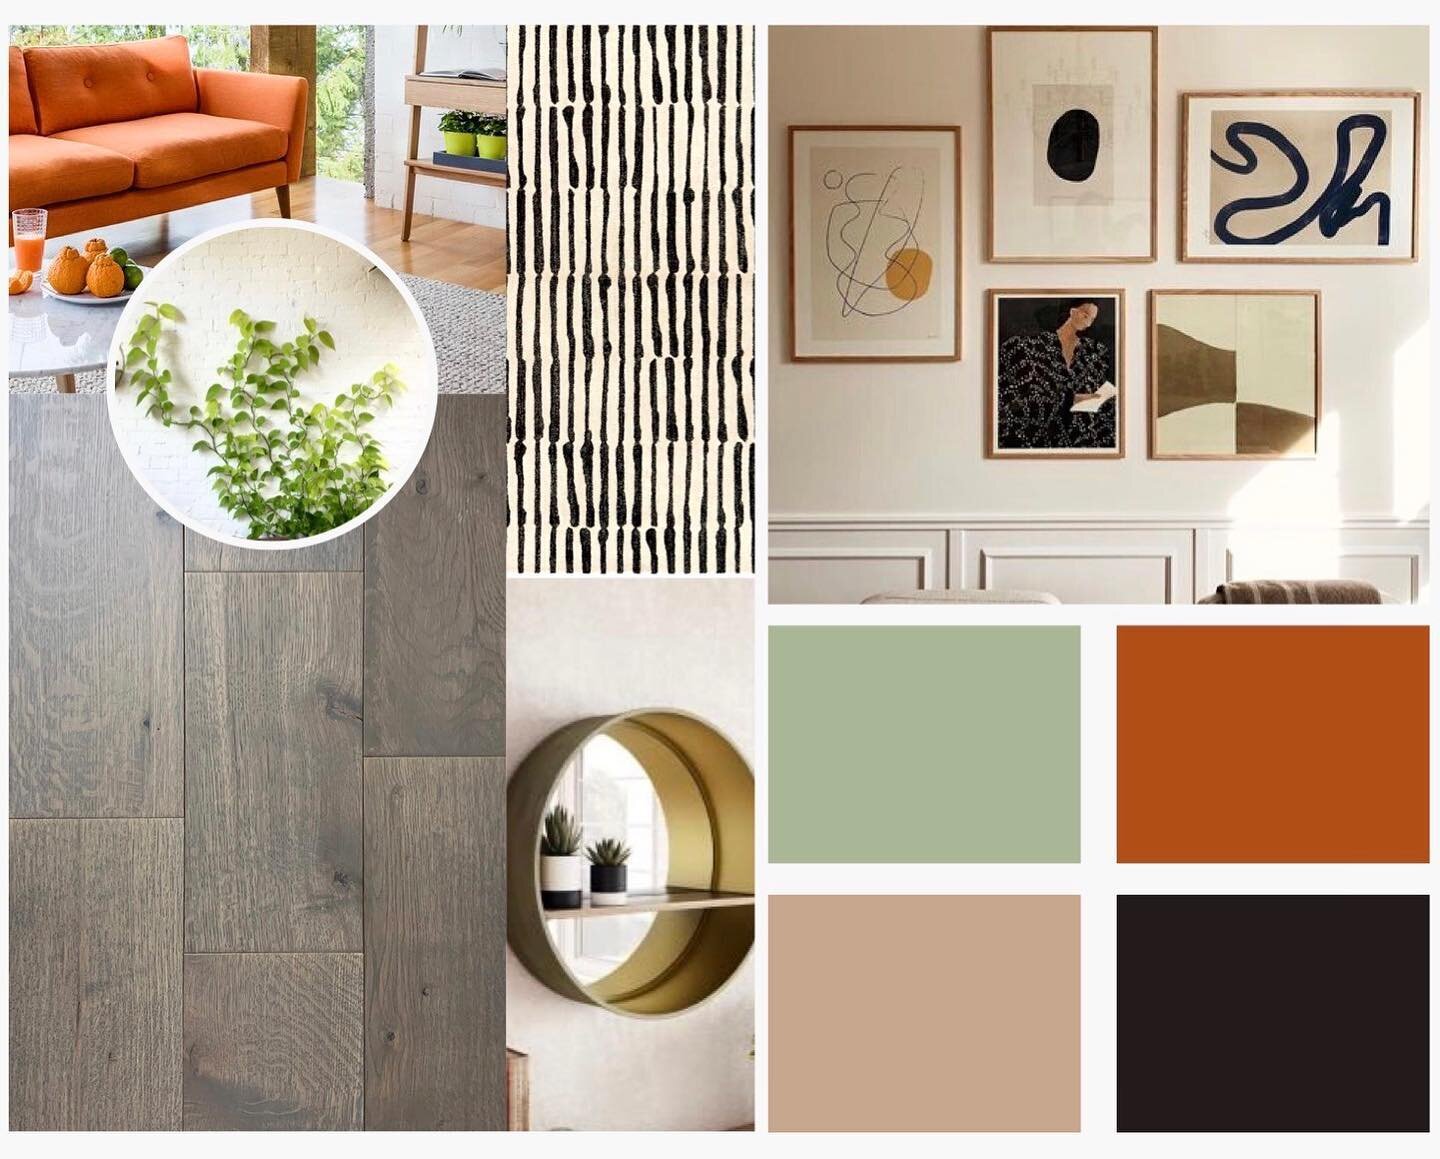 Shadow has this two-tone color that gives it its shadowy appearance. 
⁣
This feature allows it to be a neutral color that&rsquo;s not too dark nor too light. It&rsquo;s the perfect medium (literally) for pairing with various colors &amp; styles for a